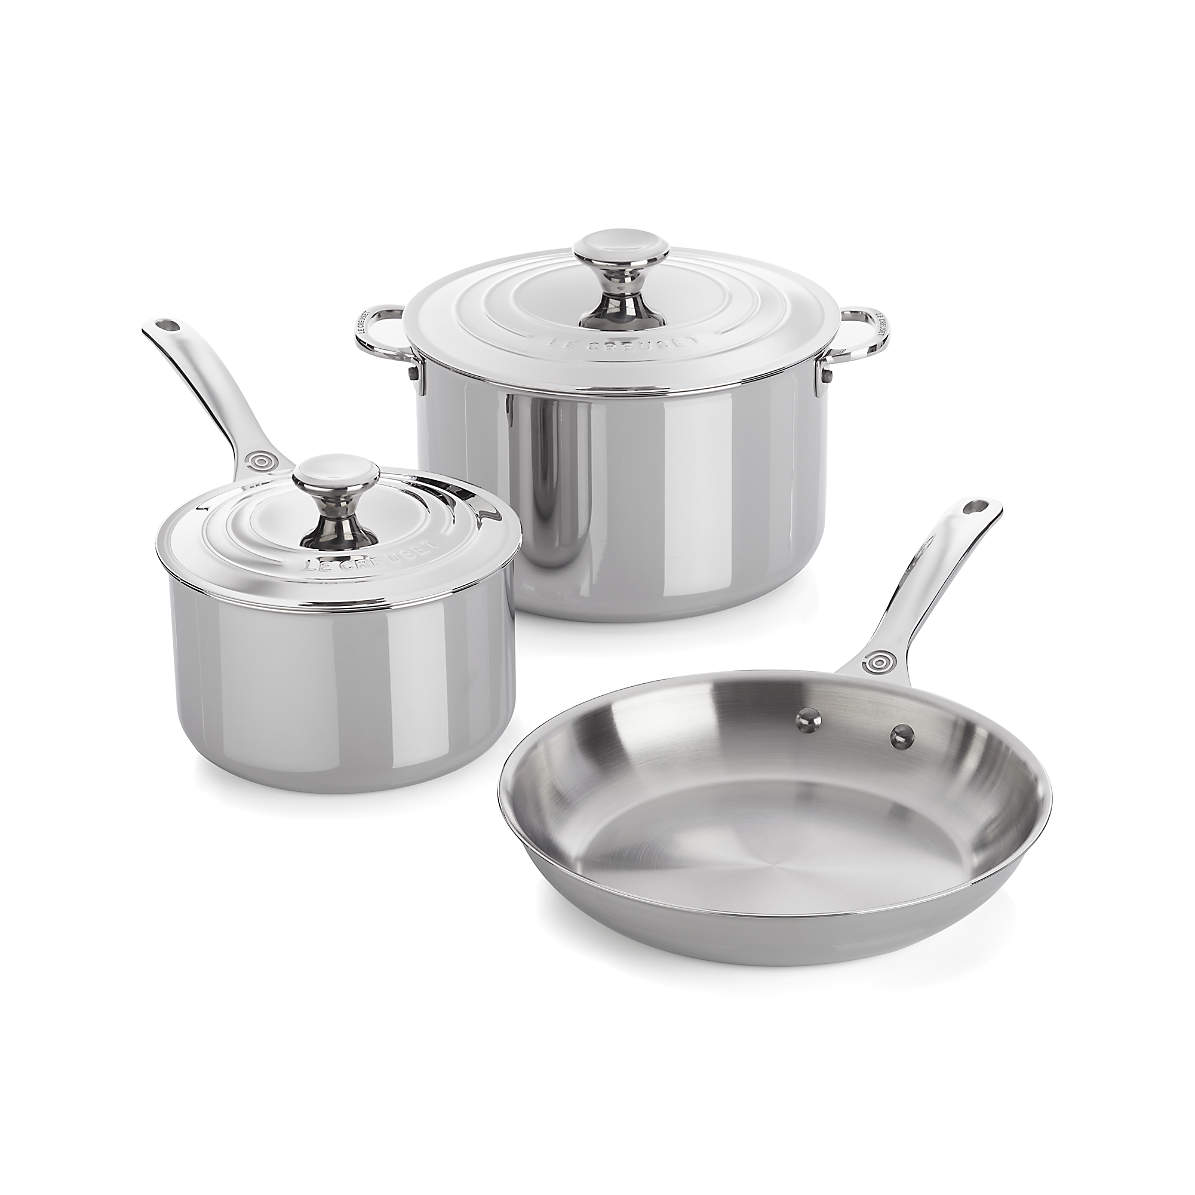 Le Cricket 15-pcs Stainless Steel Cookware Set Clearance Sale